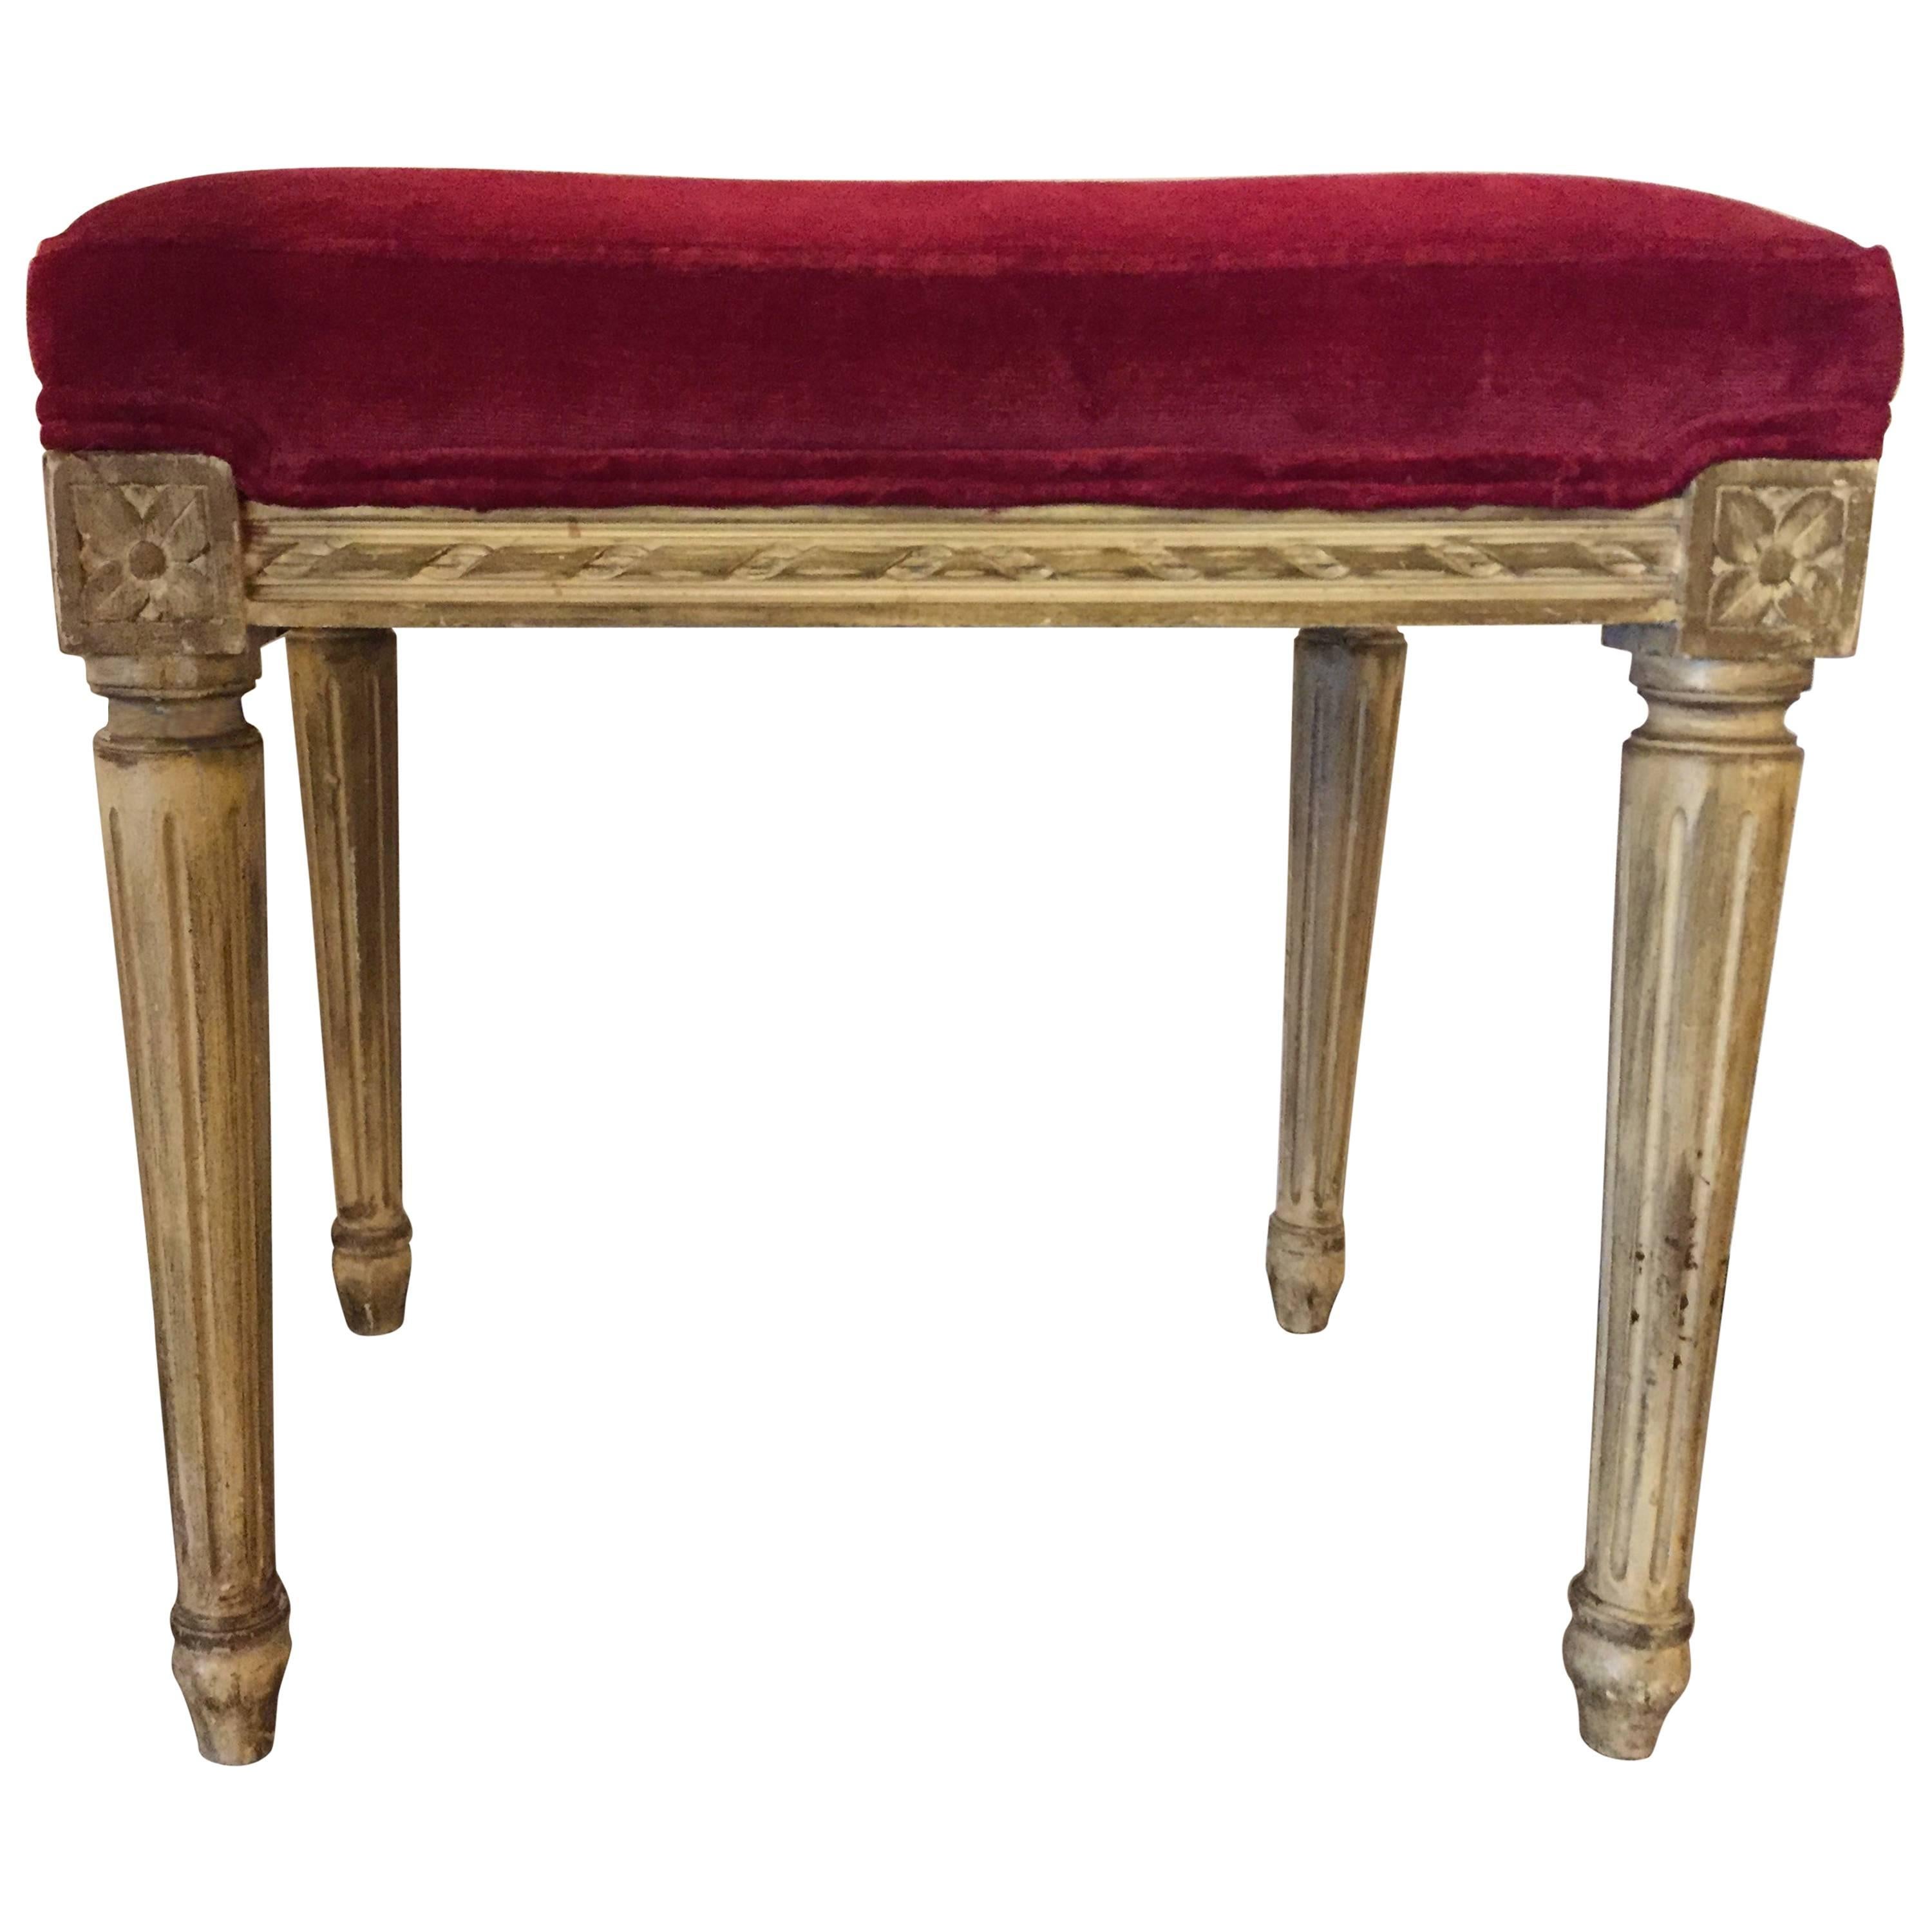 Distressed Painted Louis XVI Style Stool with Velvet Upholstery